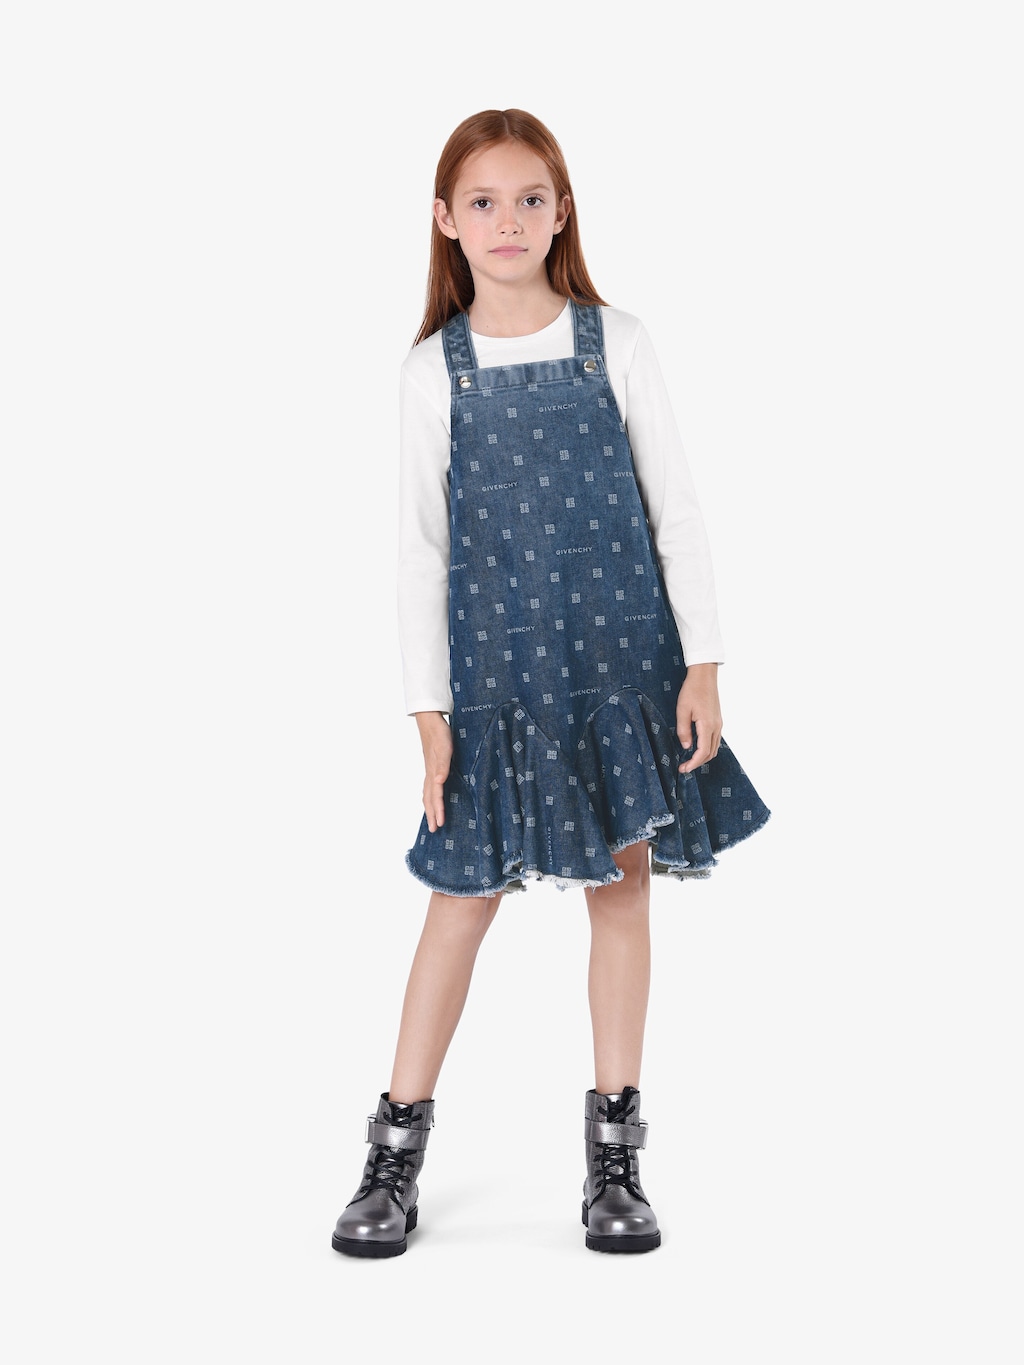 givenchy.com | Overall dress in Givency 4G denim